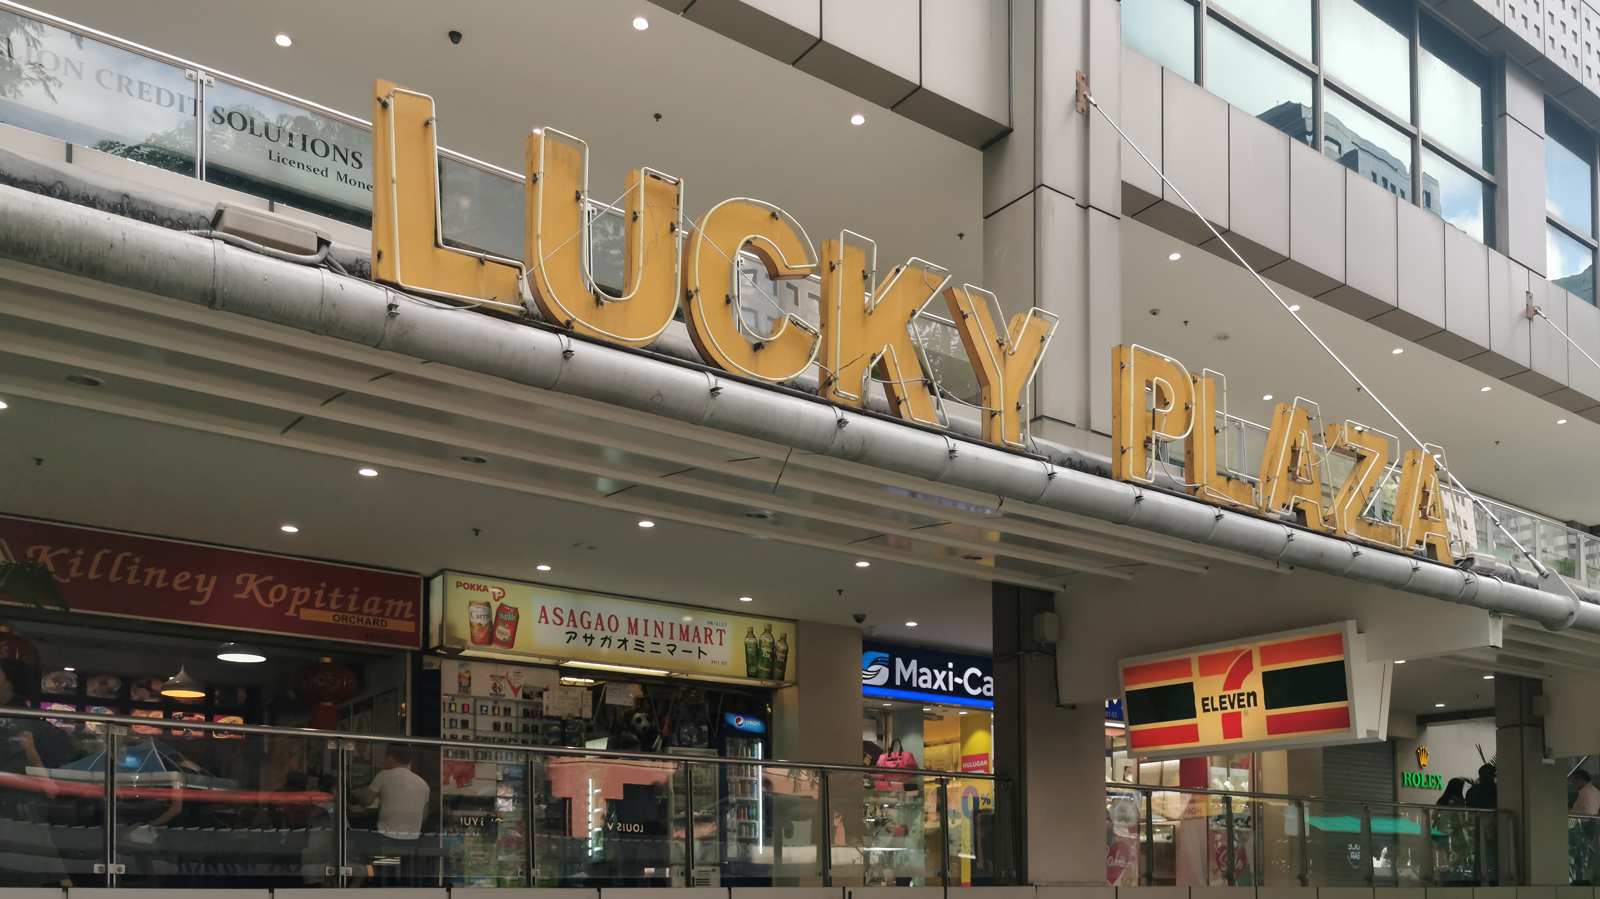 More than S$300,000 have been raised in less than a week for victims of Lucky Plaza crash